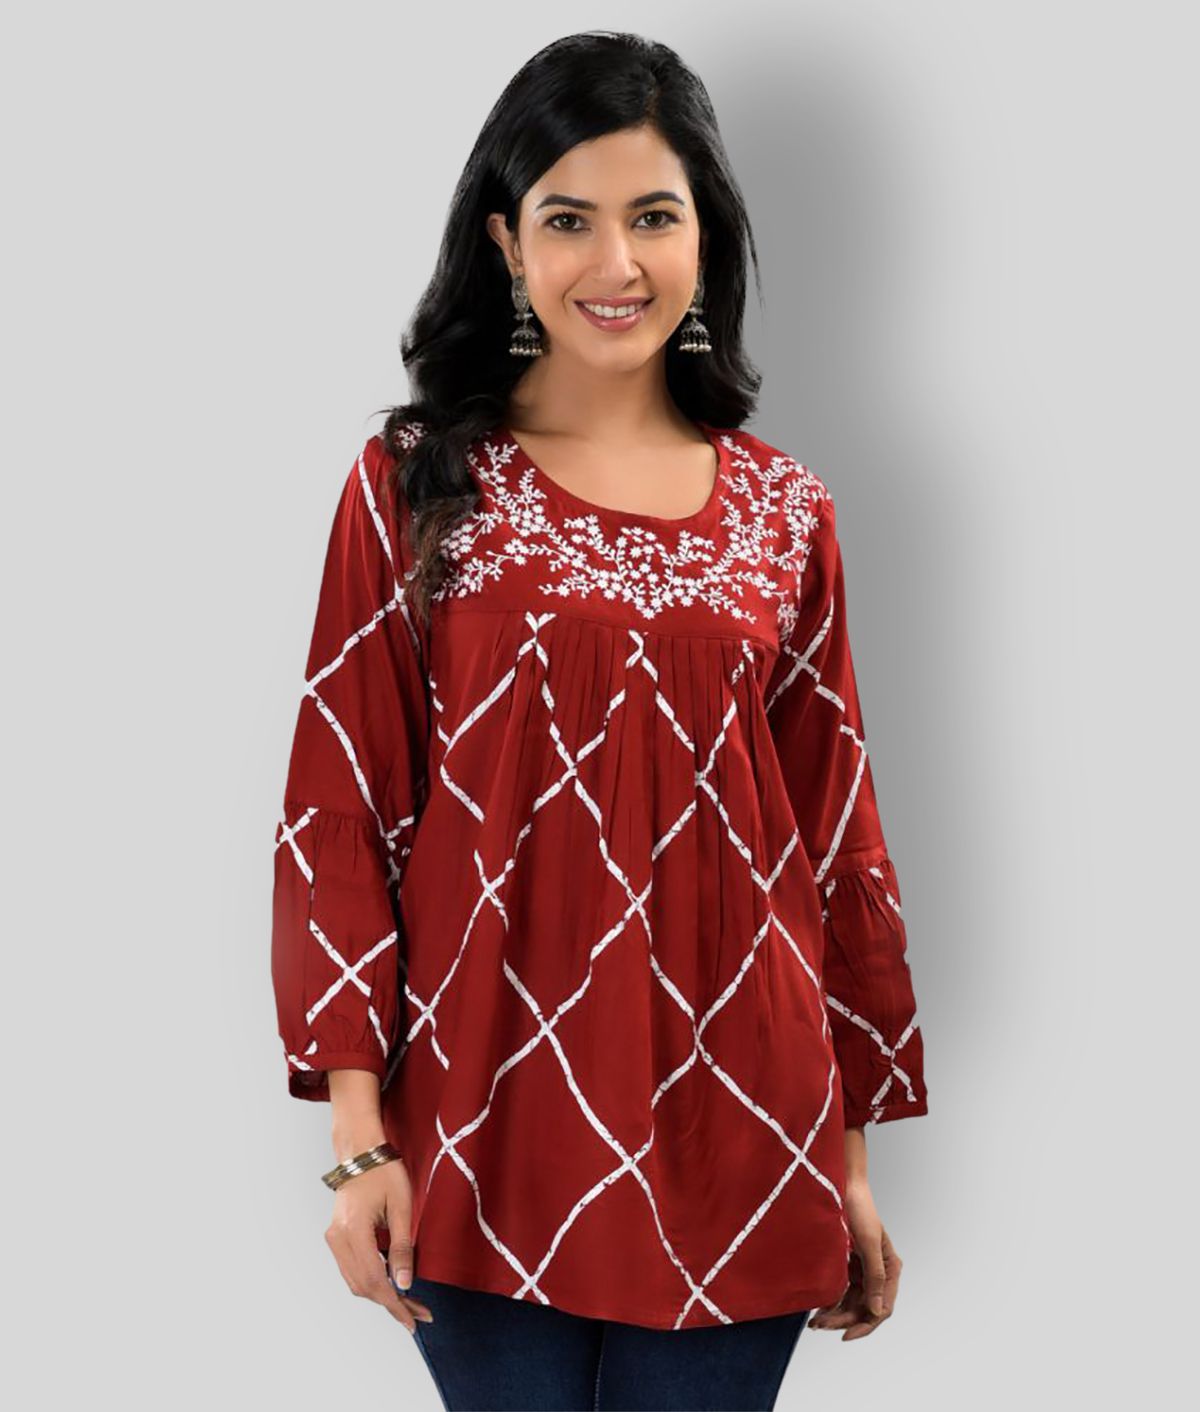     			FABRR - Maroon Rayon Women's A-Line Top ( Pack of 1 )